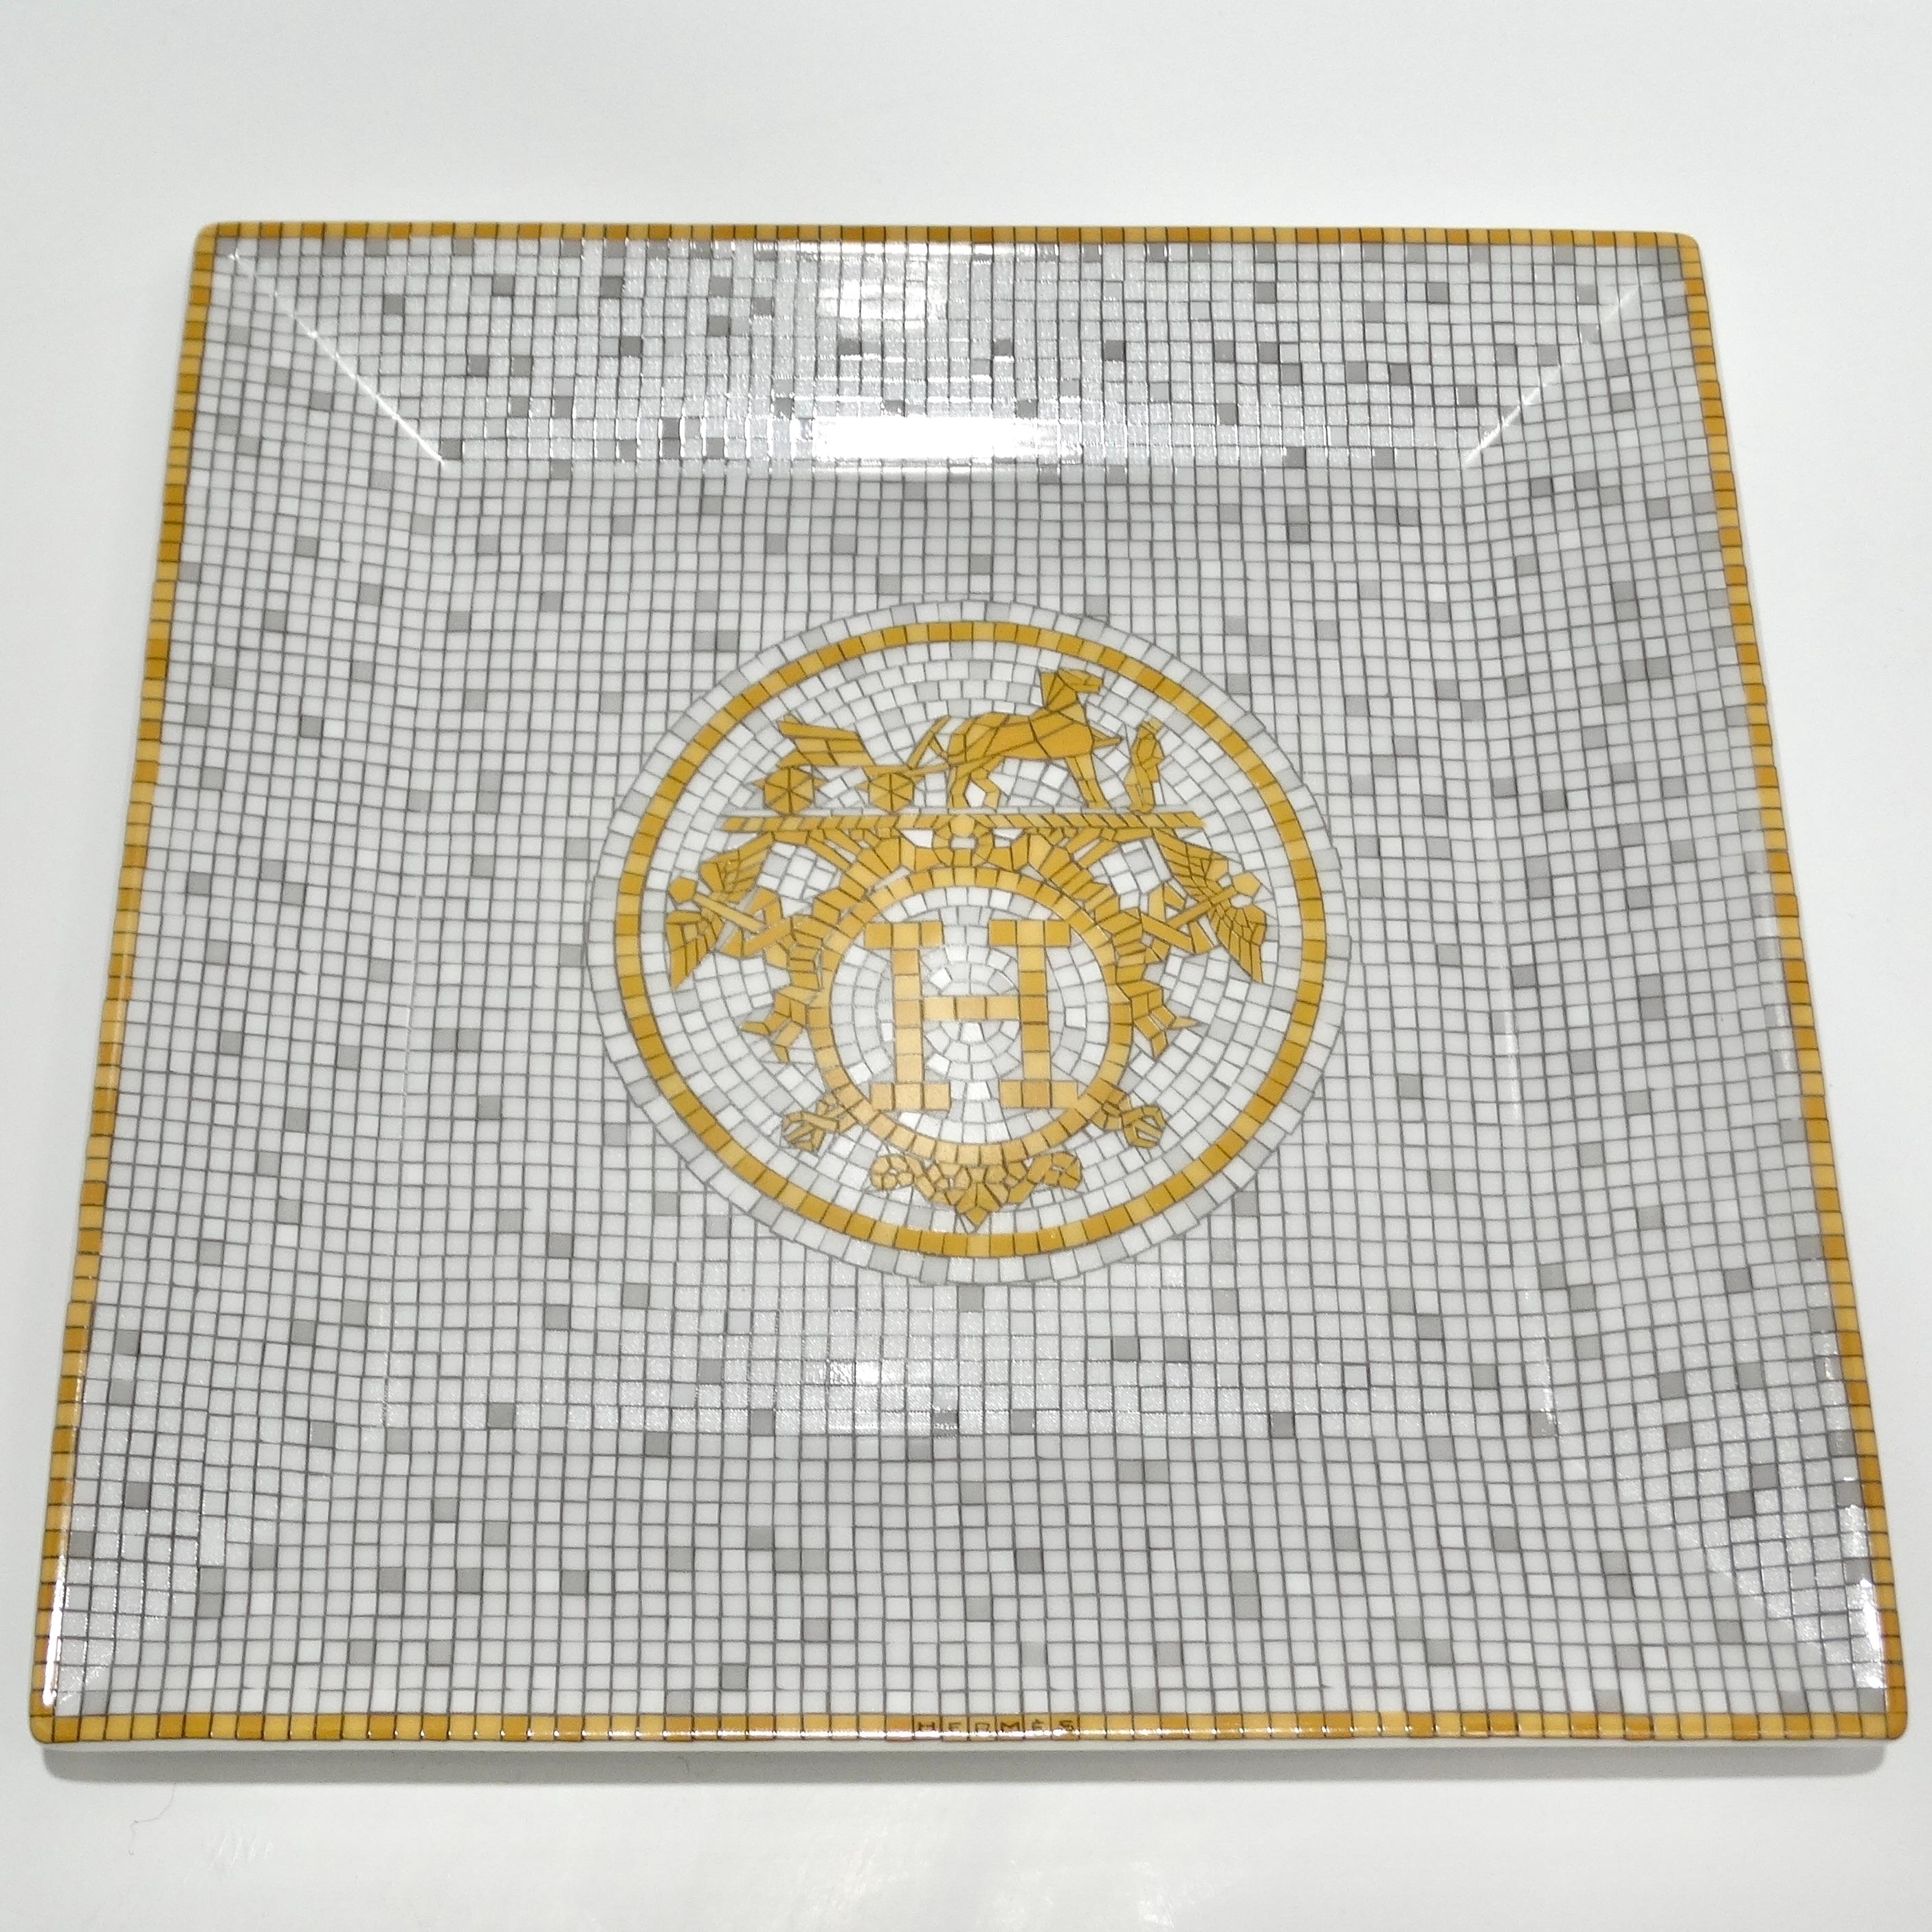 Hermes Mosaique Square Plate For Sale 2